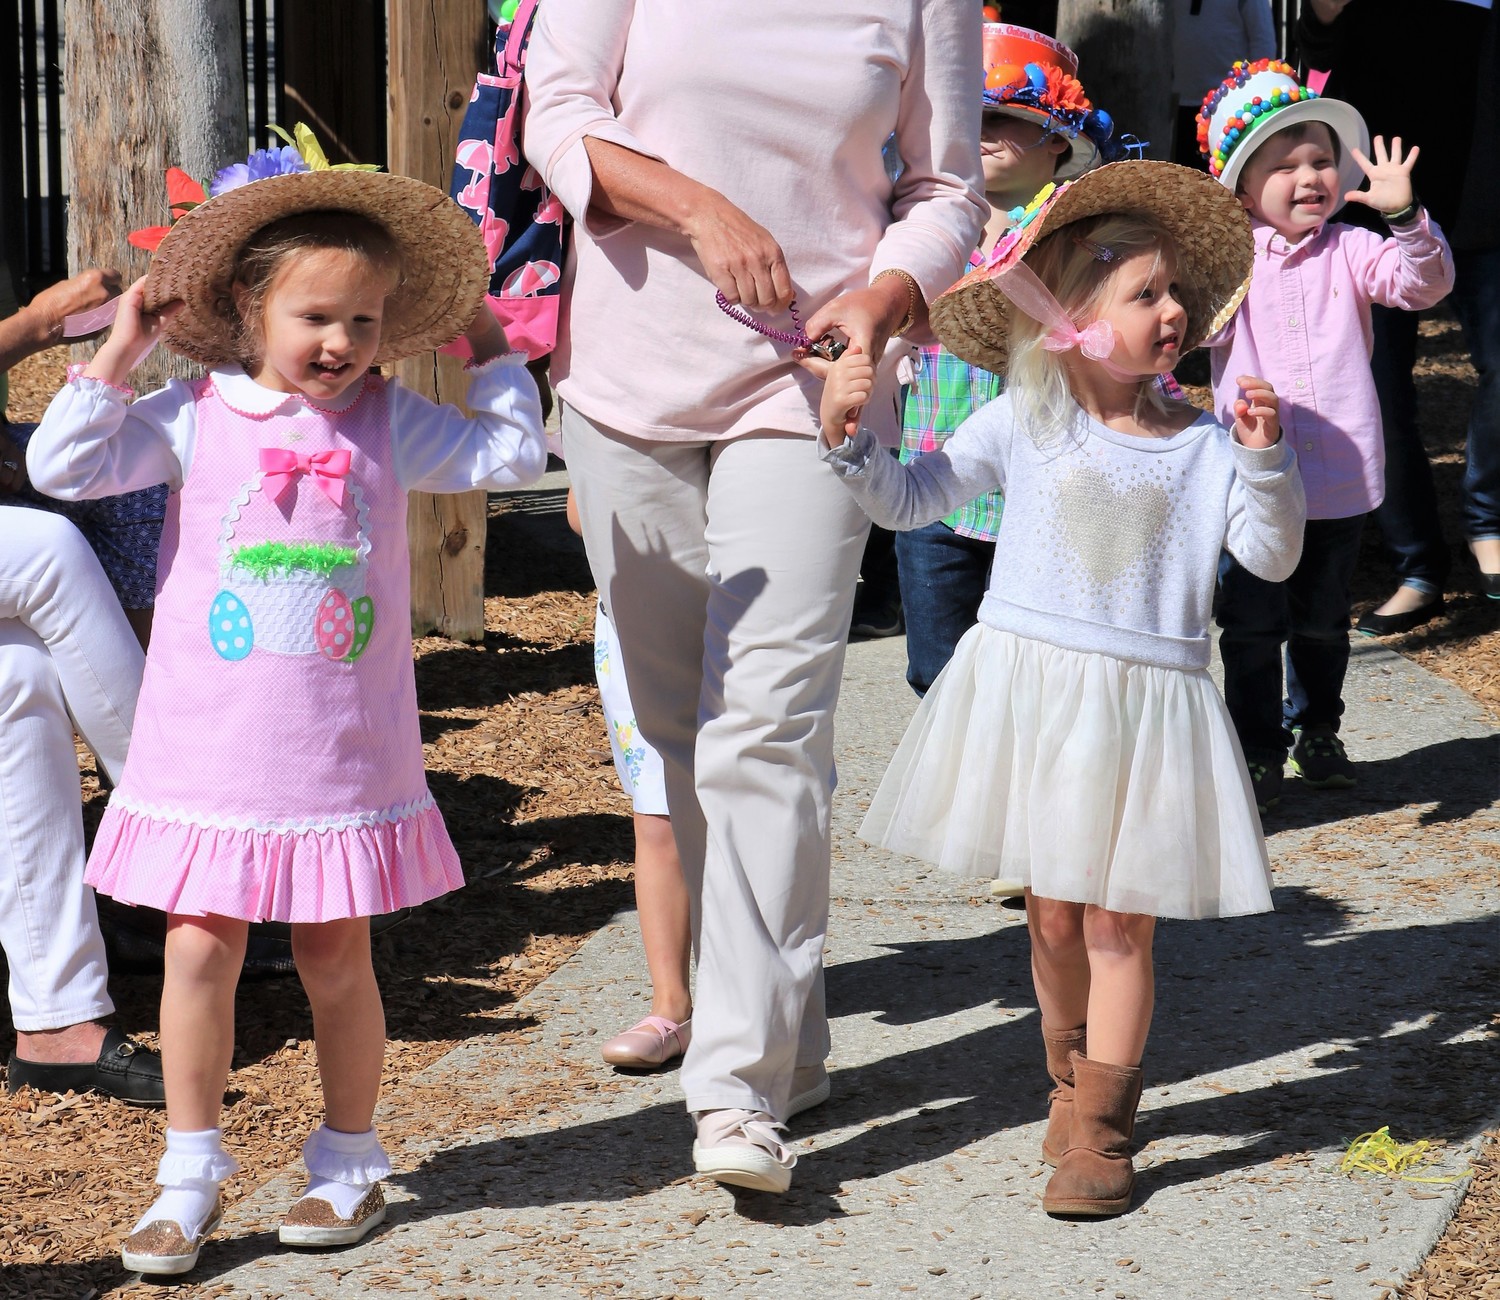 Children dressed in Easter attire smile and wave at spectators.